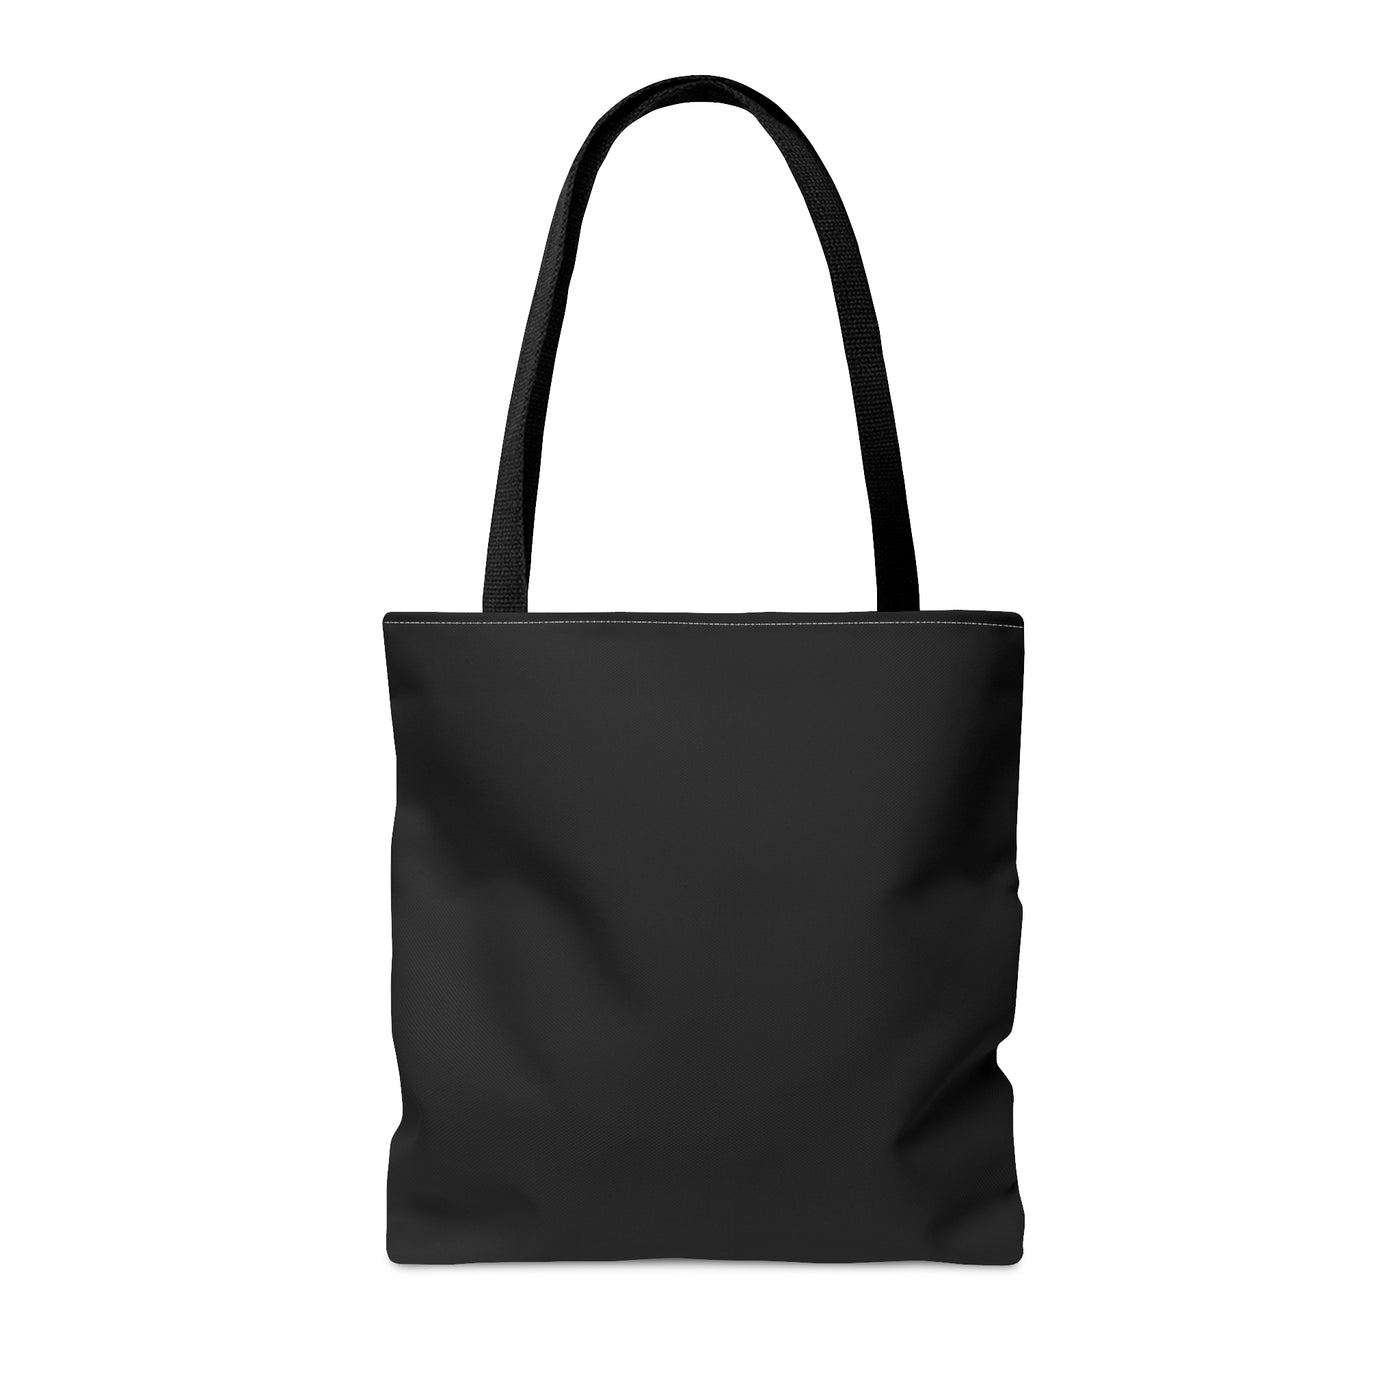 Shopping Tote Bag | Reusable Grocery Bags | Let's Travel